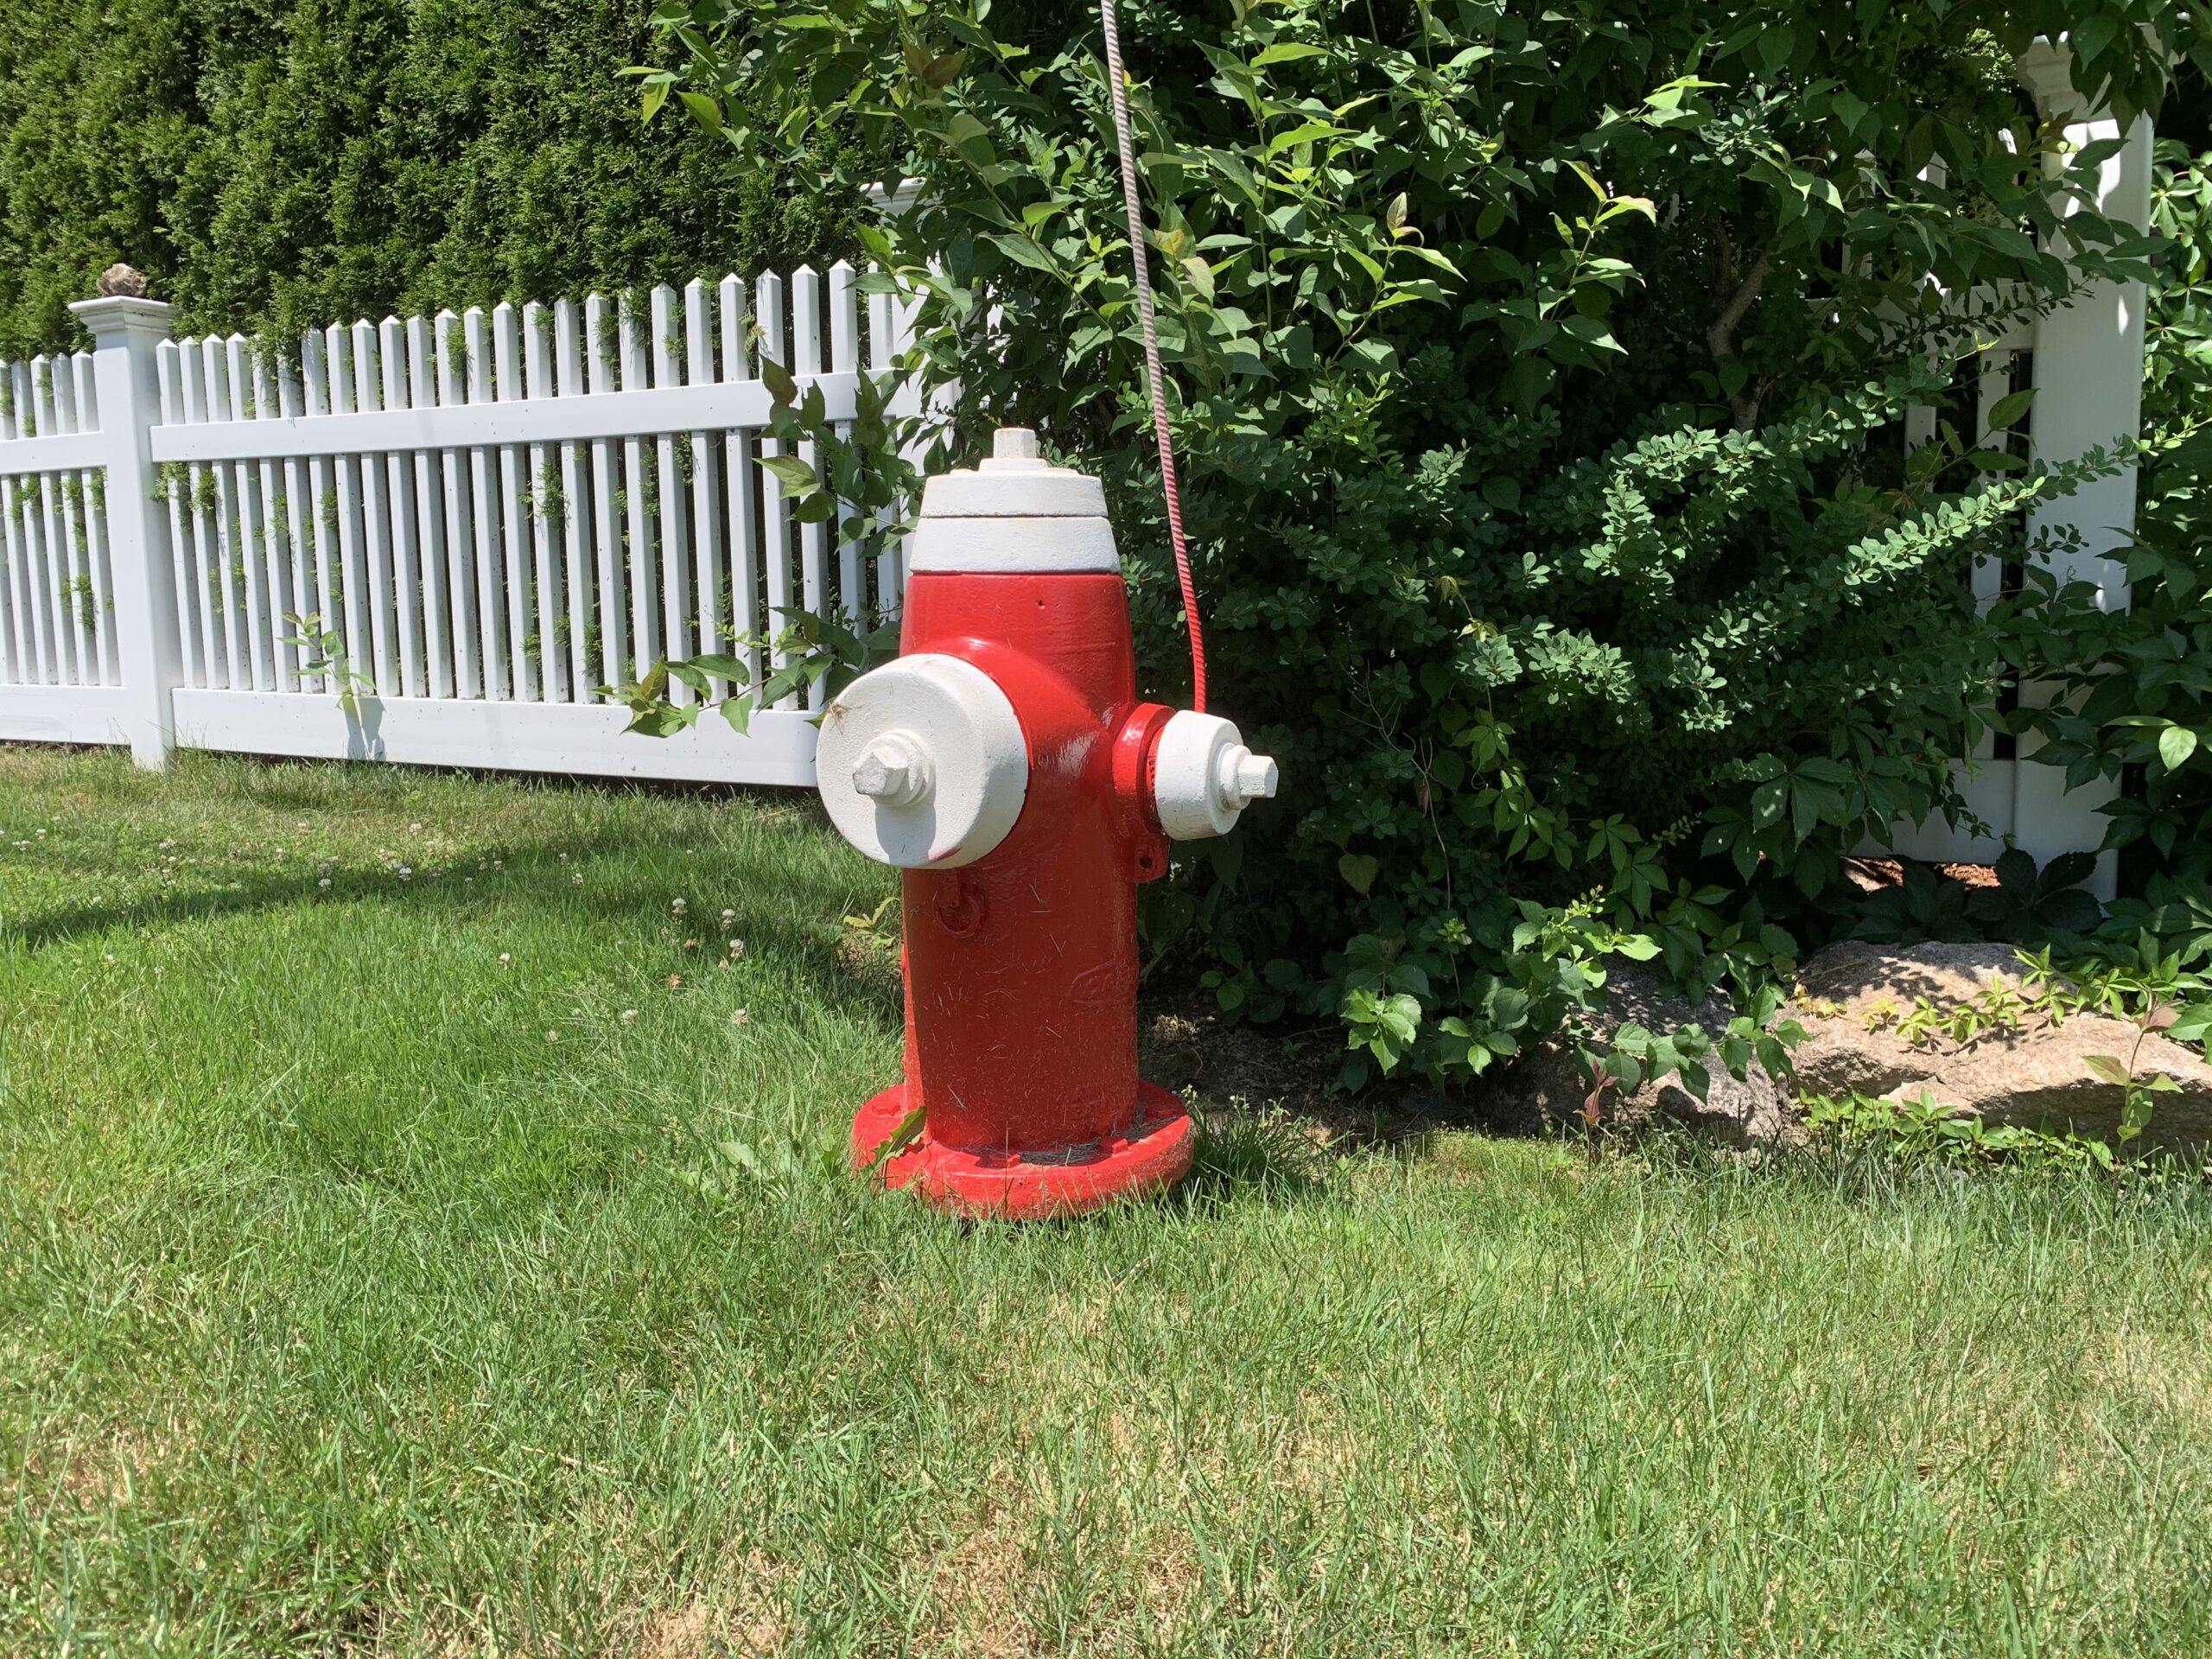 Hydrant flushing could lead to water discoloration